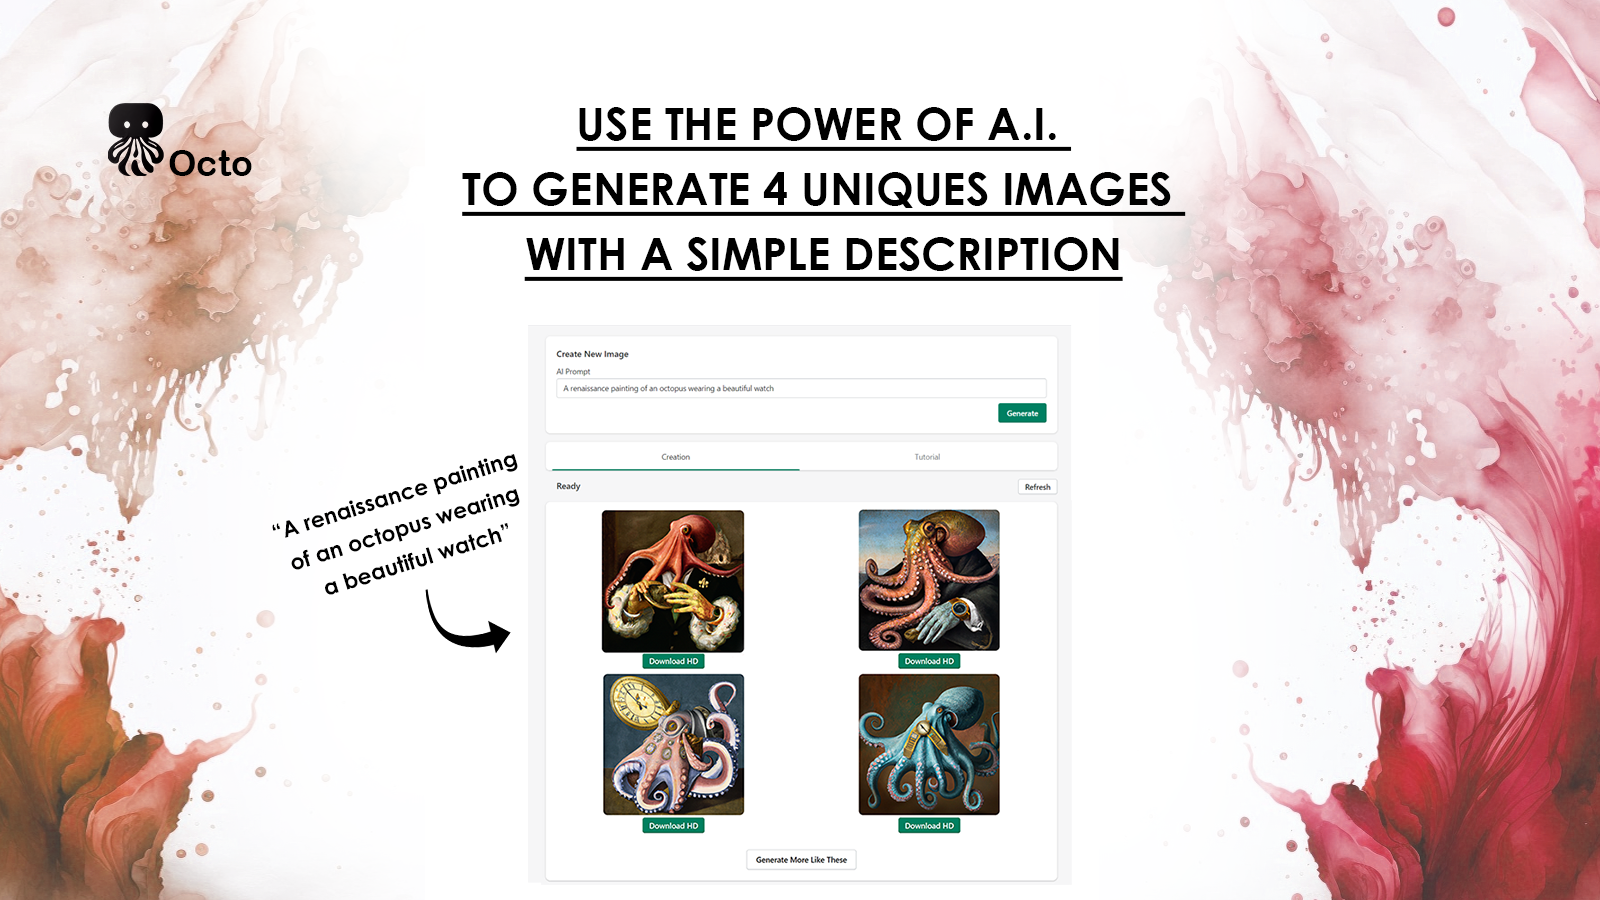 Octo will provide you 4 unique images each generation 